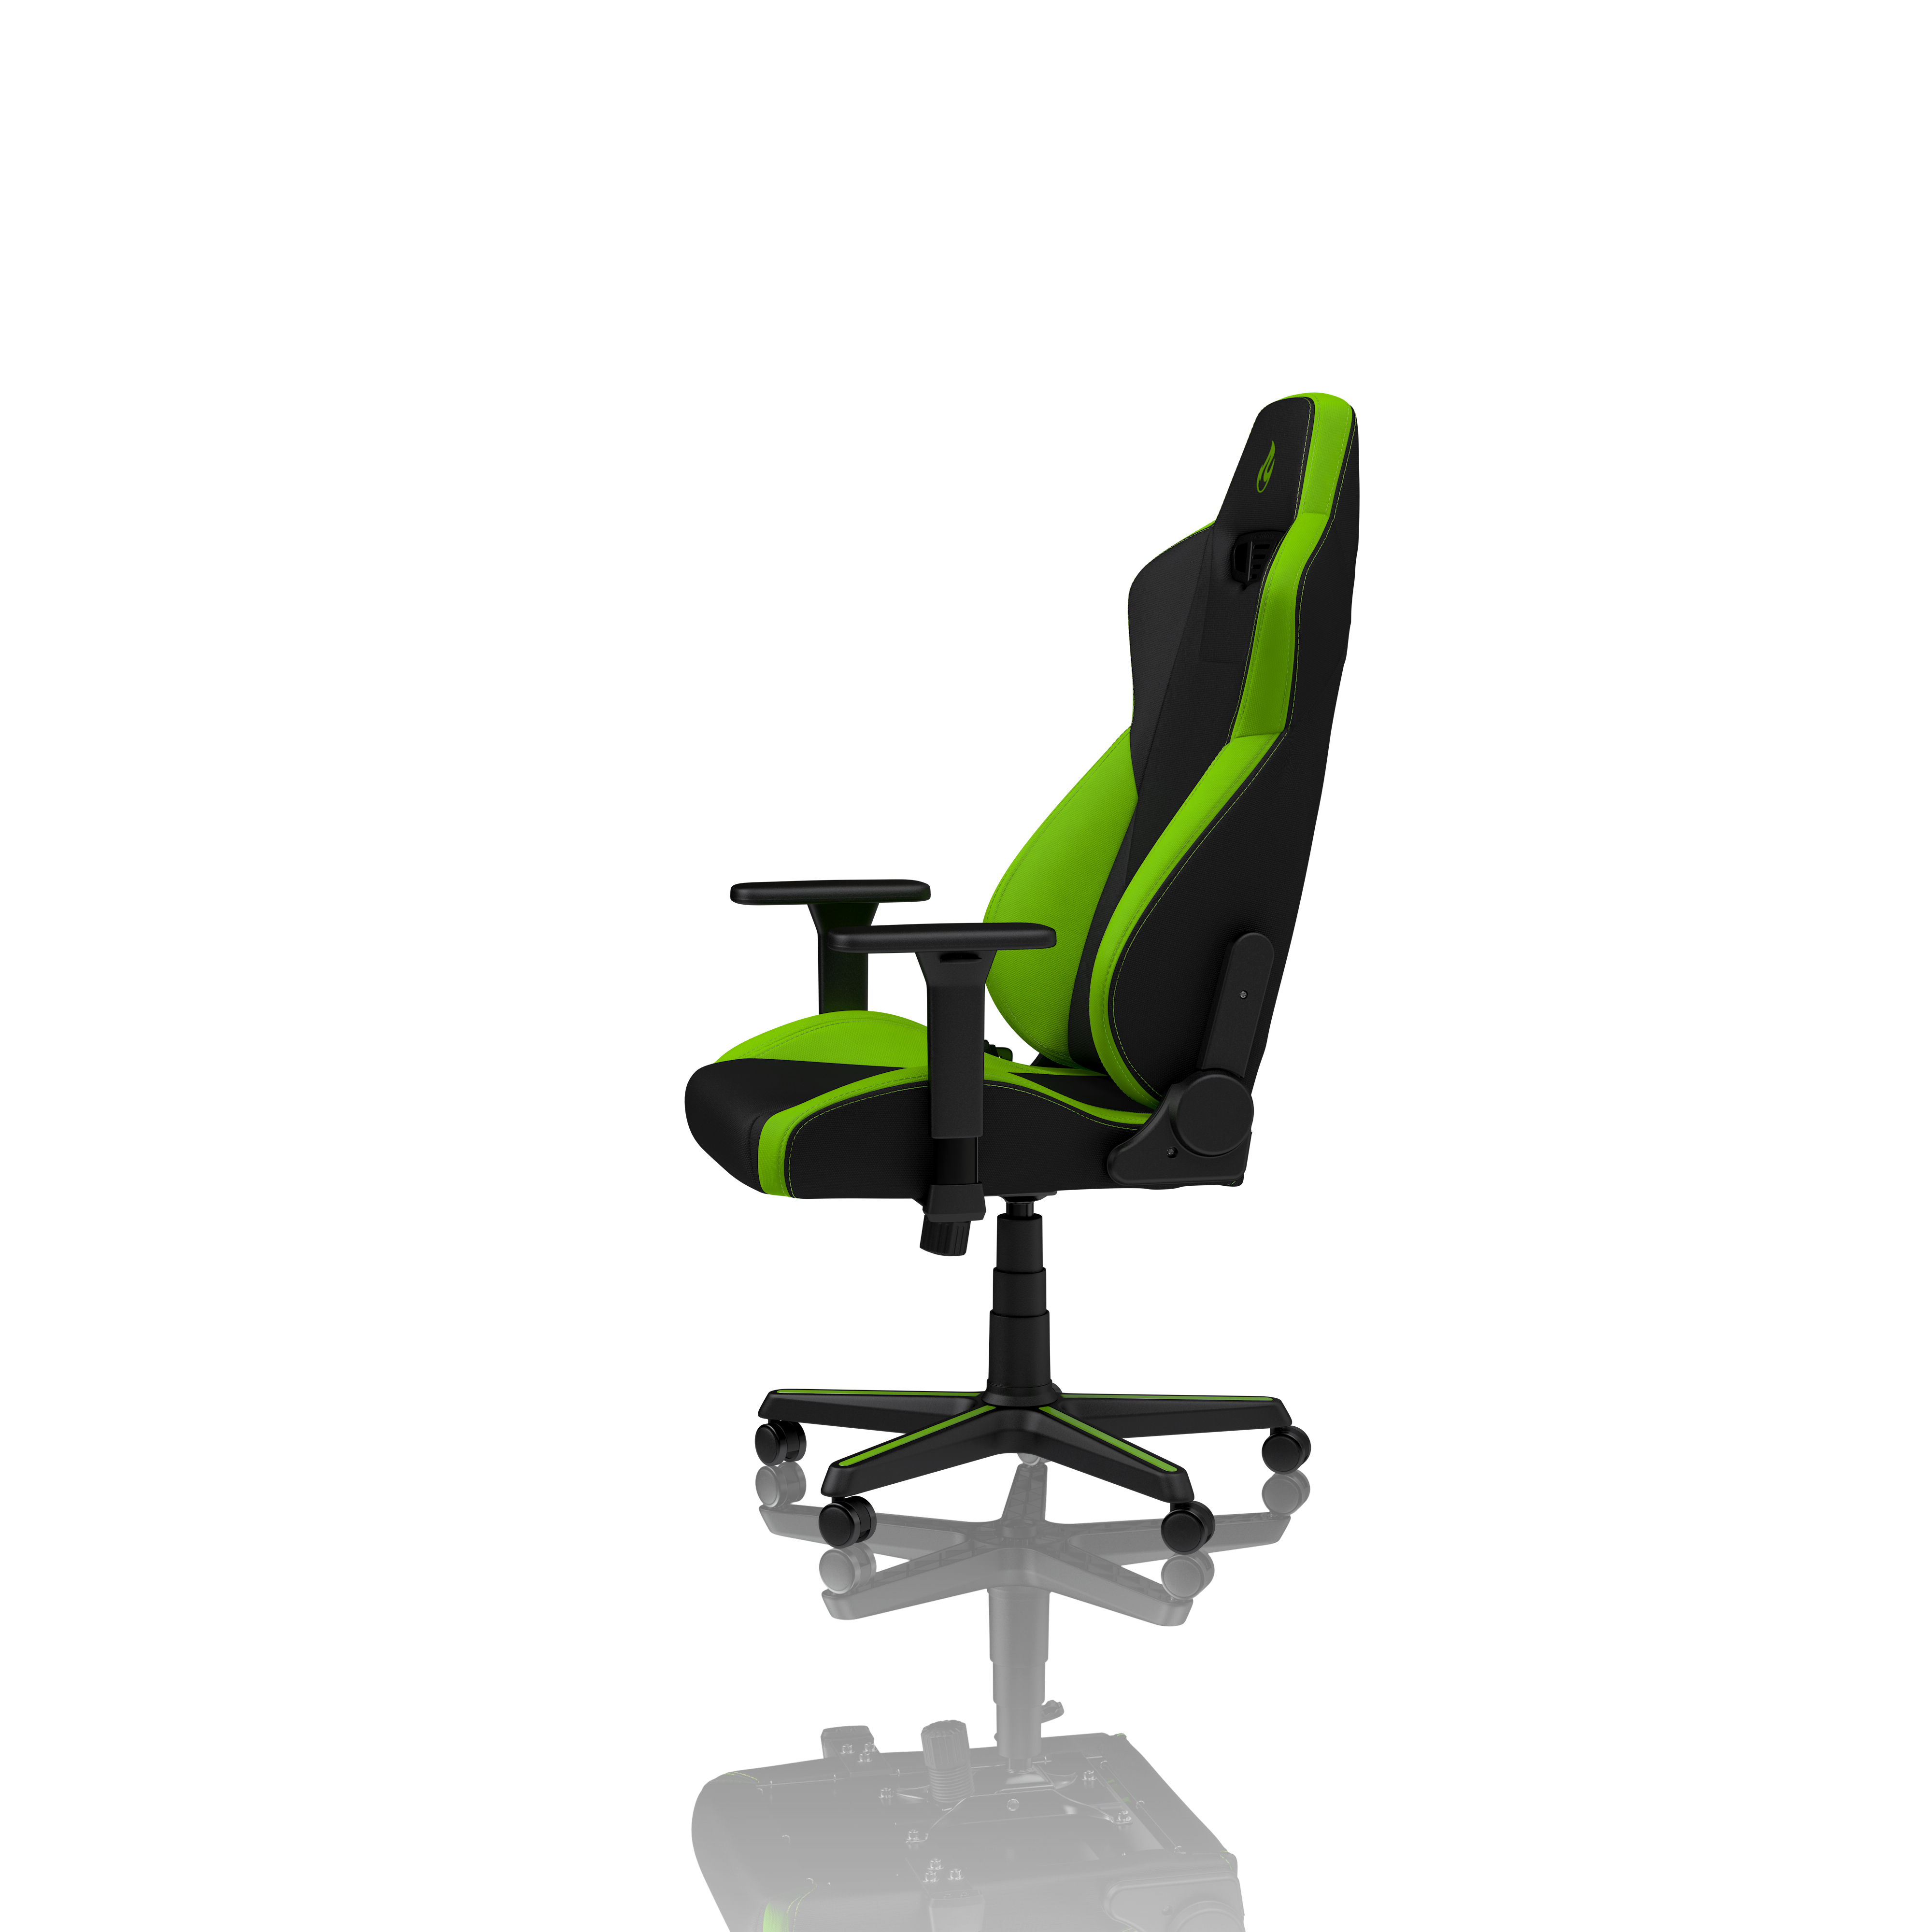 Nitro Concepts - S300 Gaming Chair Atomic Green